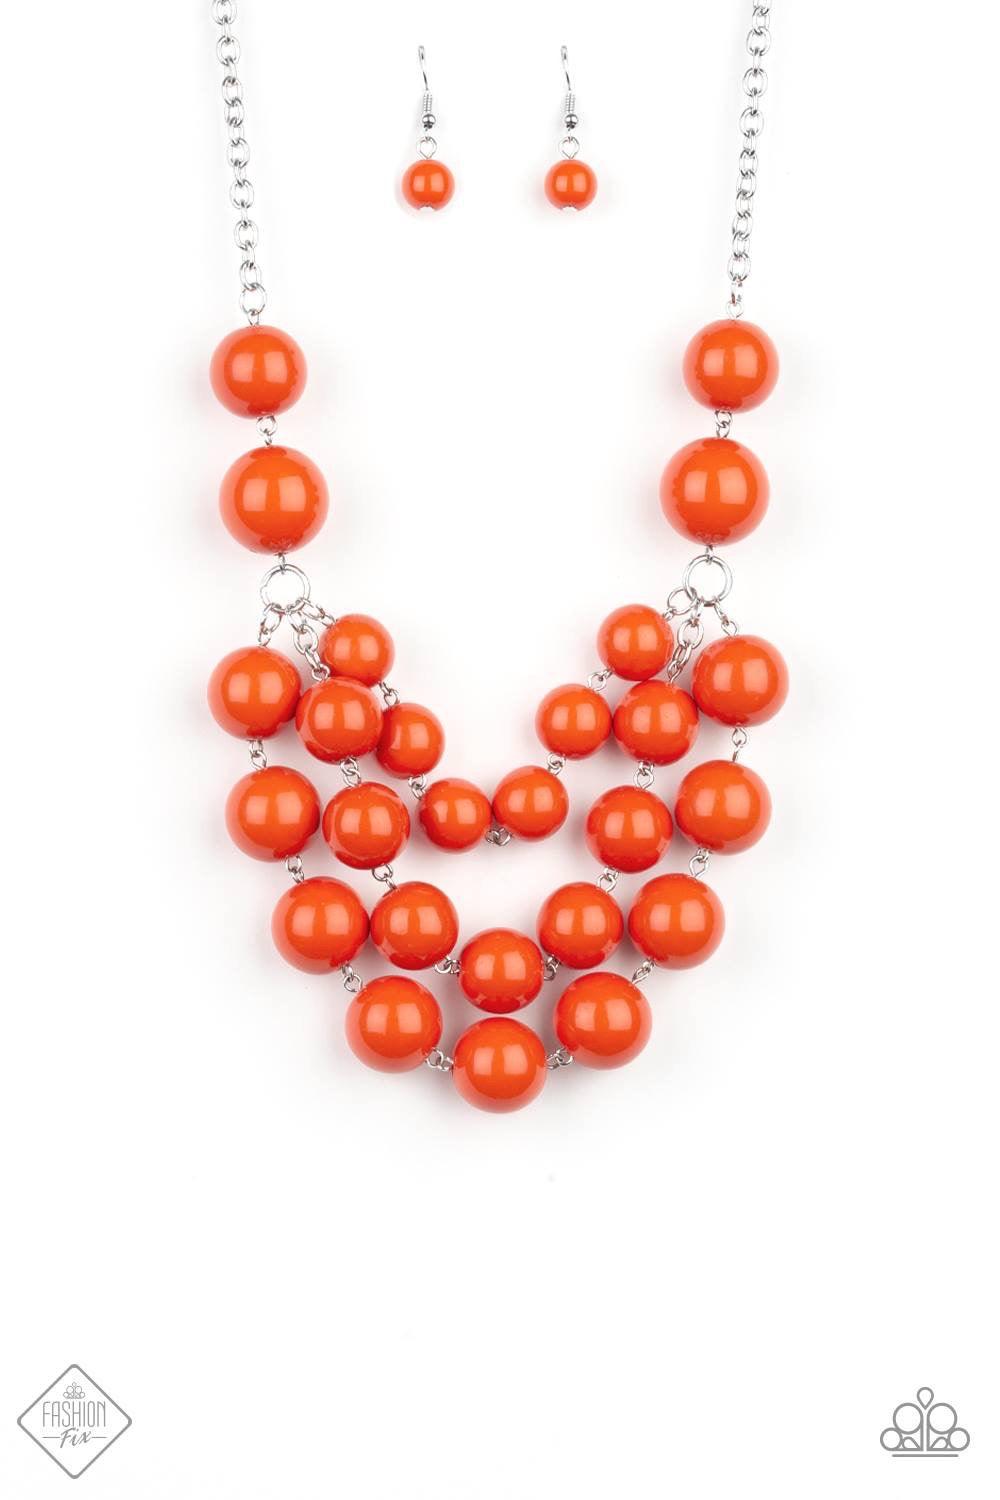 Paparazzi Accessories Miss Pop-YOU-larity - Orange Three strands of bubbly orange beads cascade below the collar, creating colorful layers. Jewelry